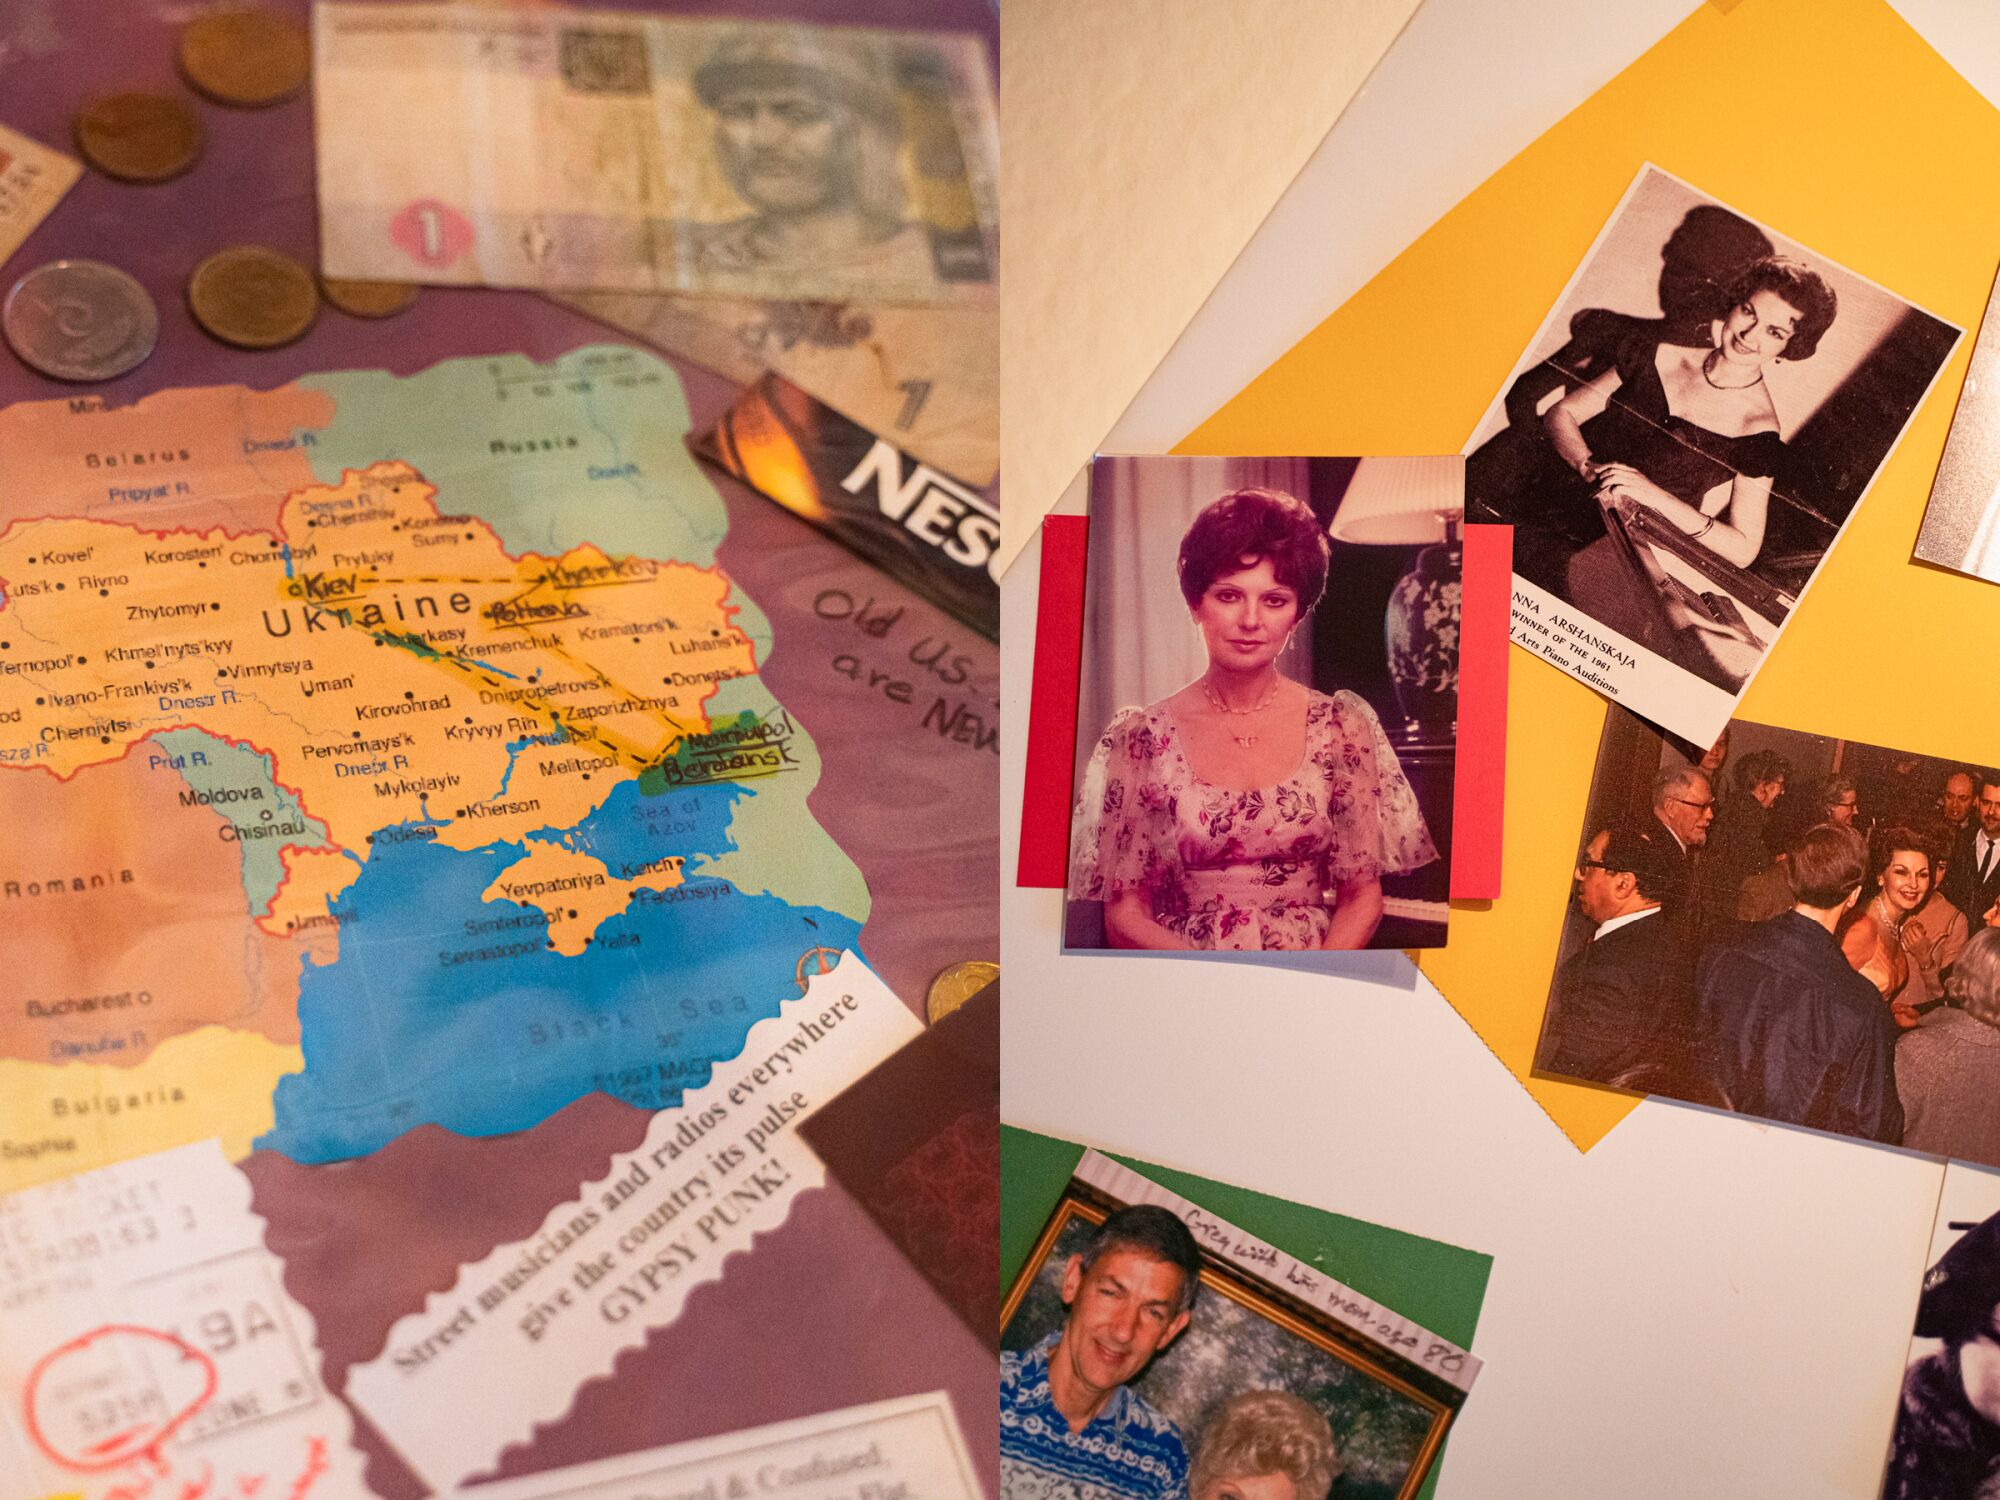 Two photos side by side, one showing scrapbook memorabilia and a map of Ukraine, the other showing old photos of a woman.